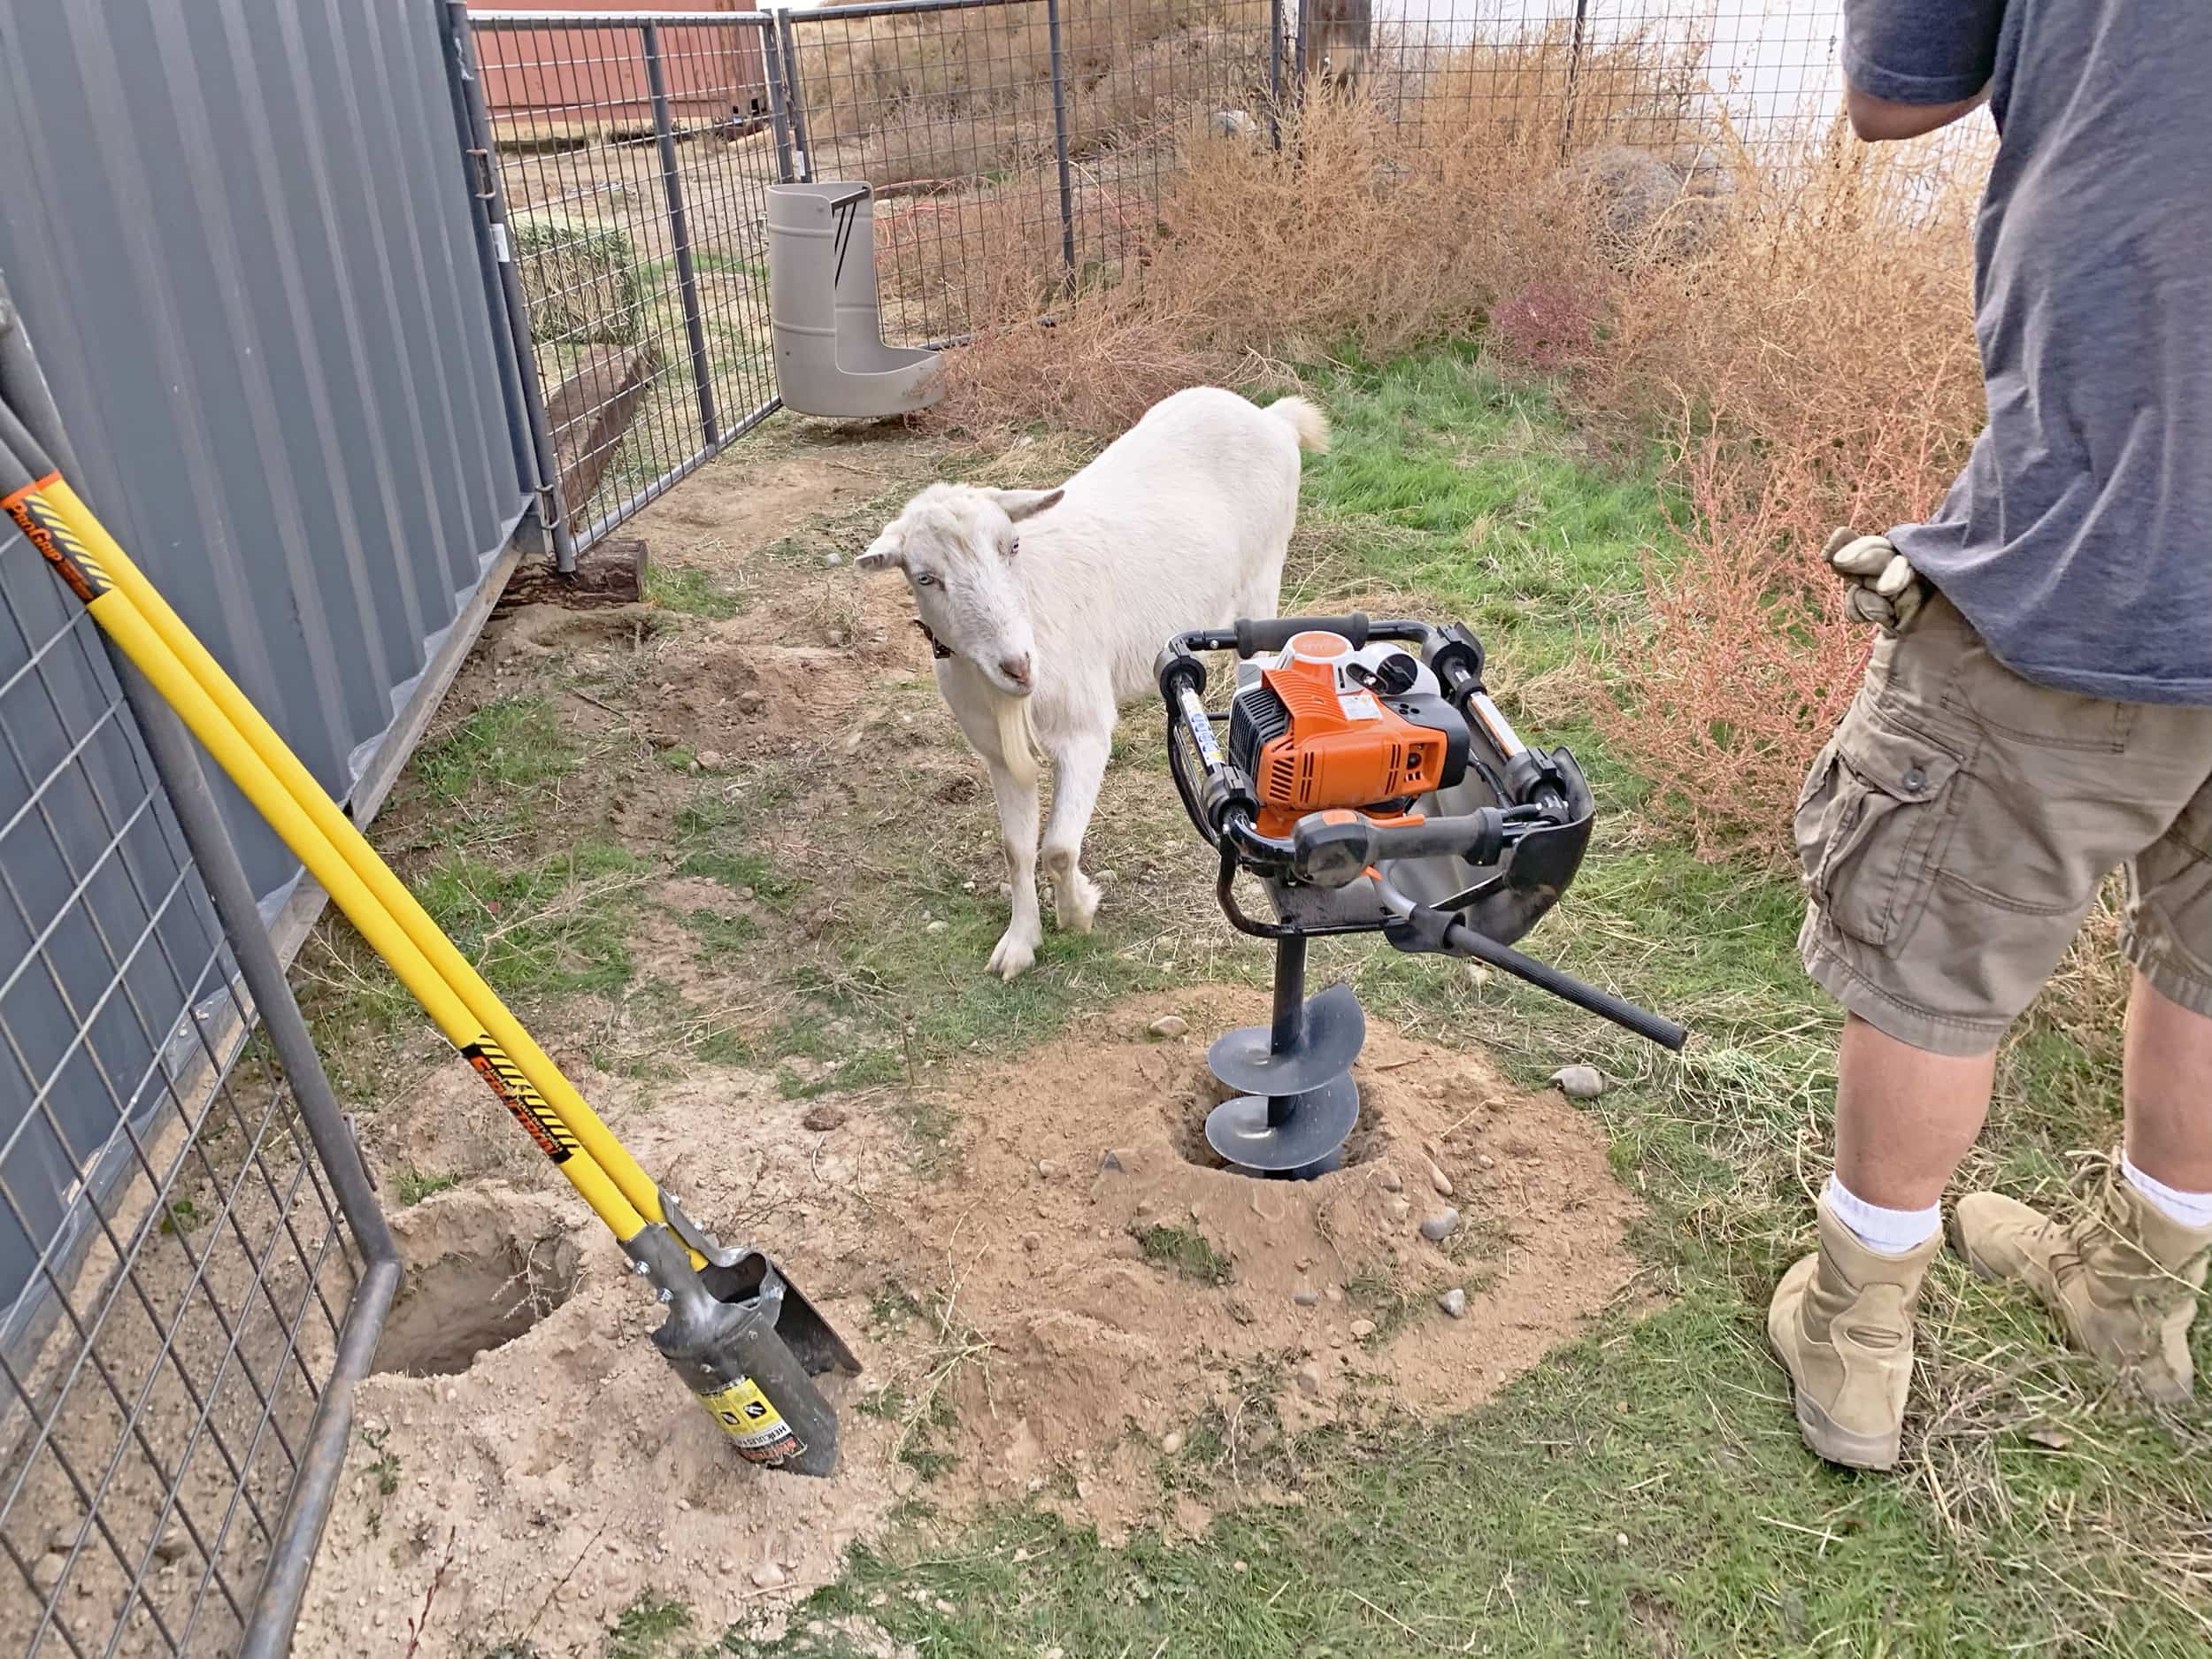 White goat and stihl auger on farm